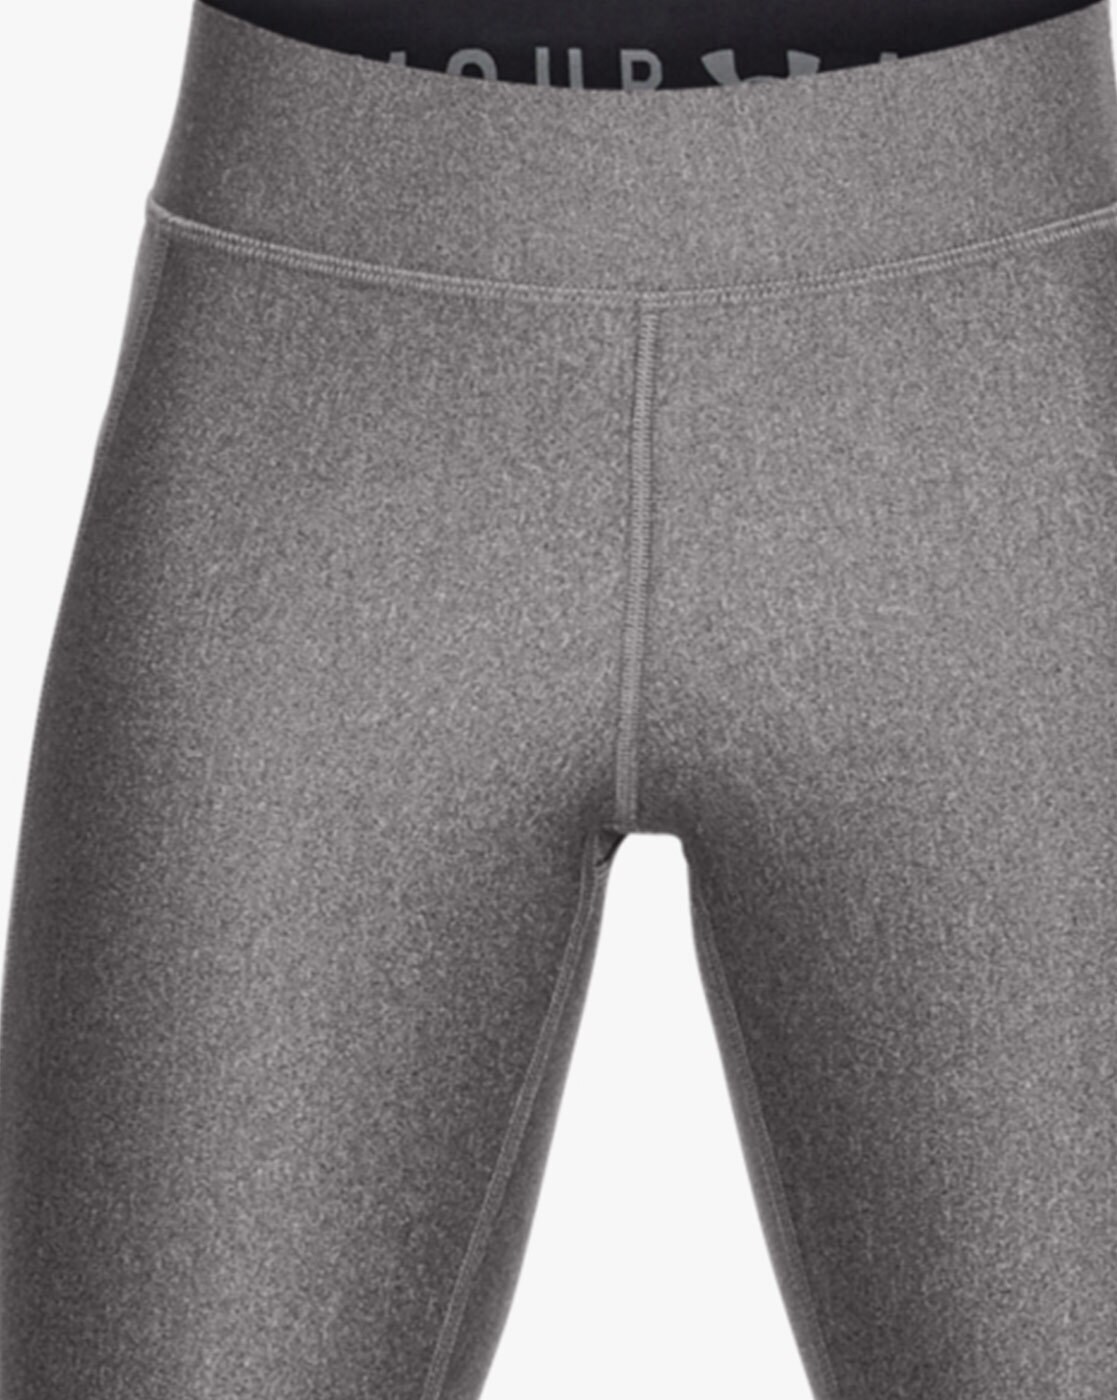 Buy Grey Leggings for Women by Under Armour Online